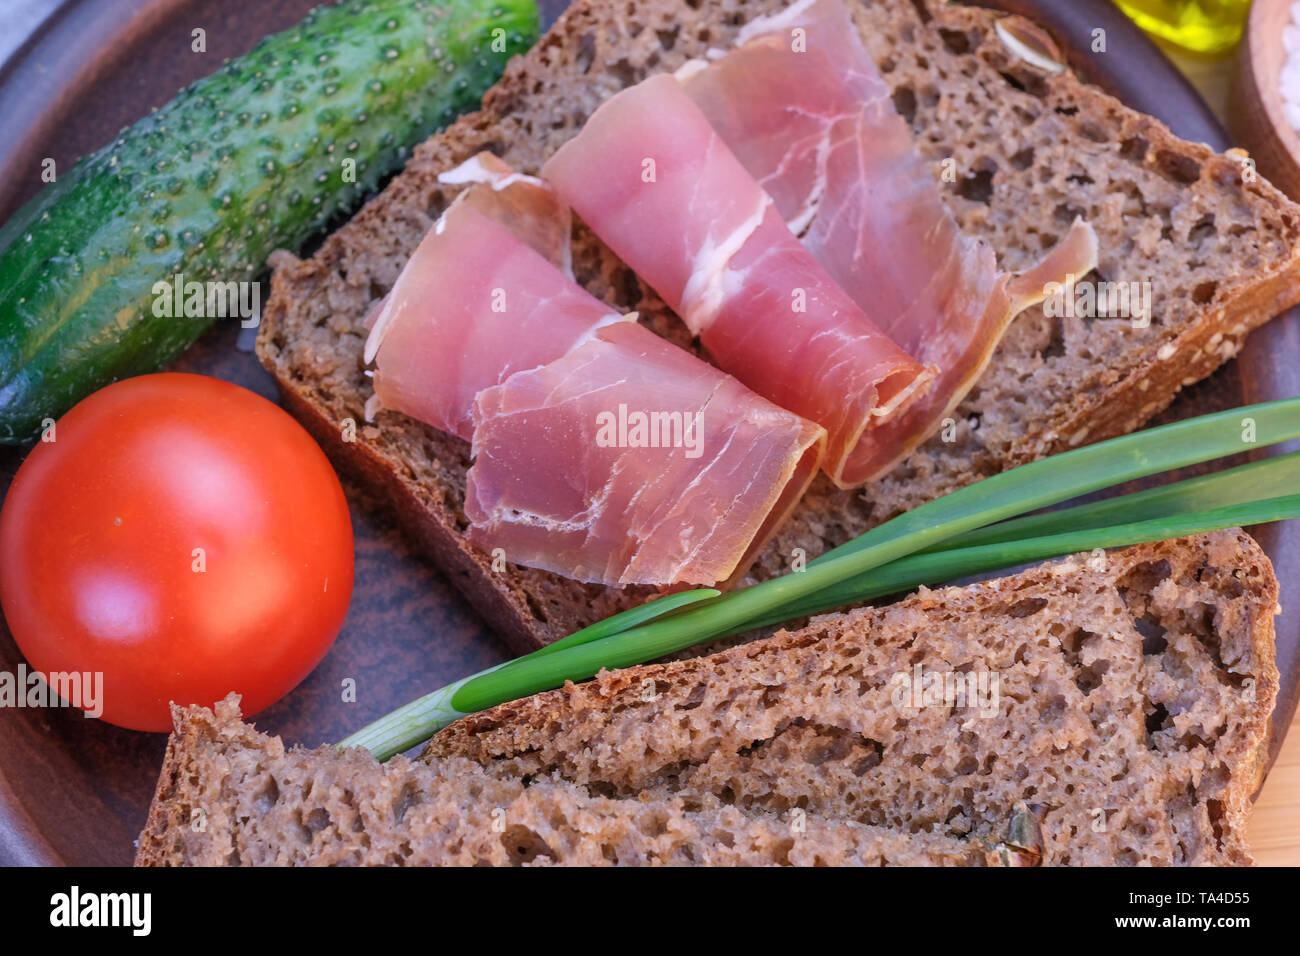 Snack with homemade rye bread and dried pork on a brown clay plate close-up Stock Photo